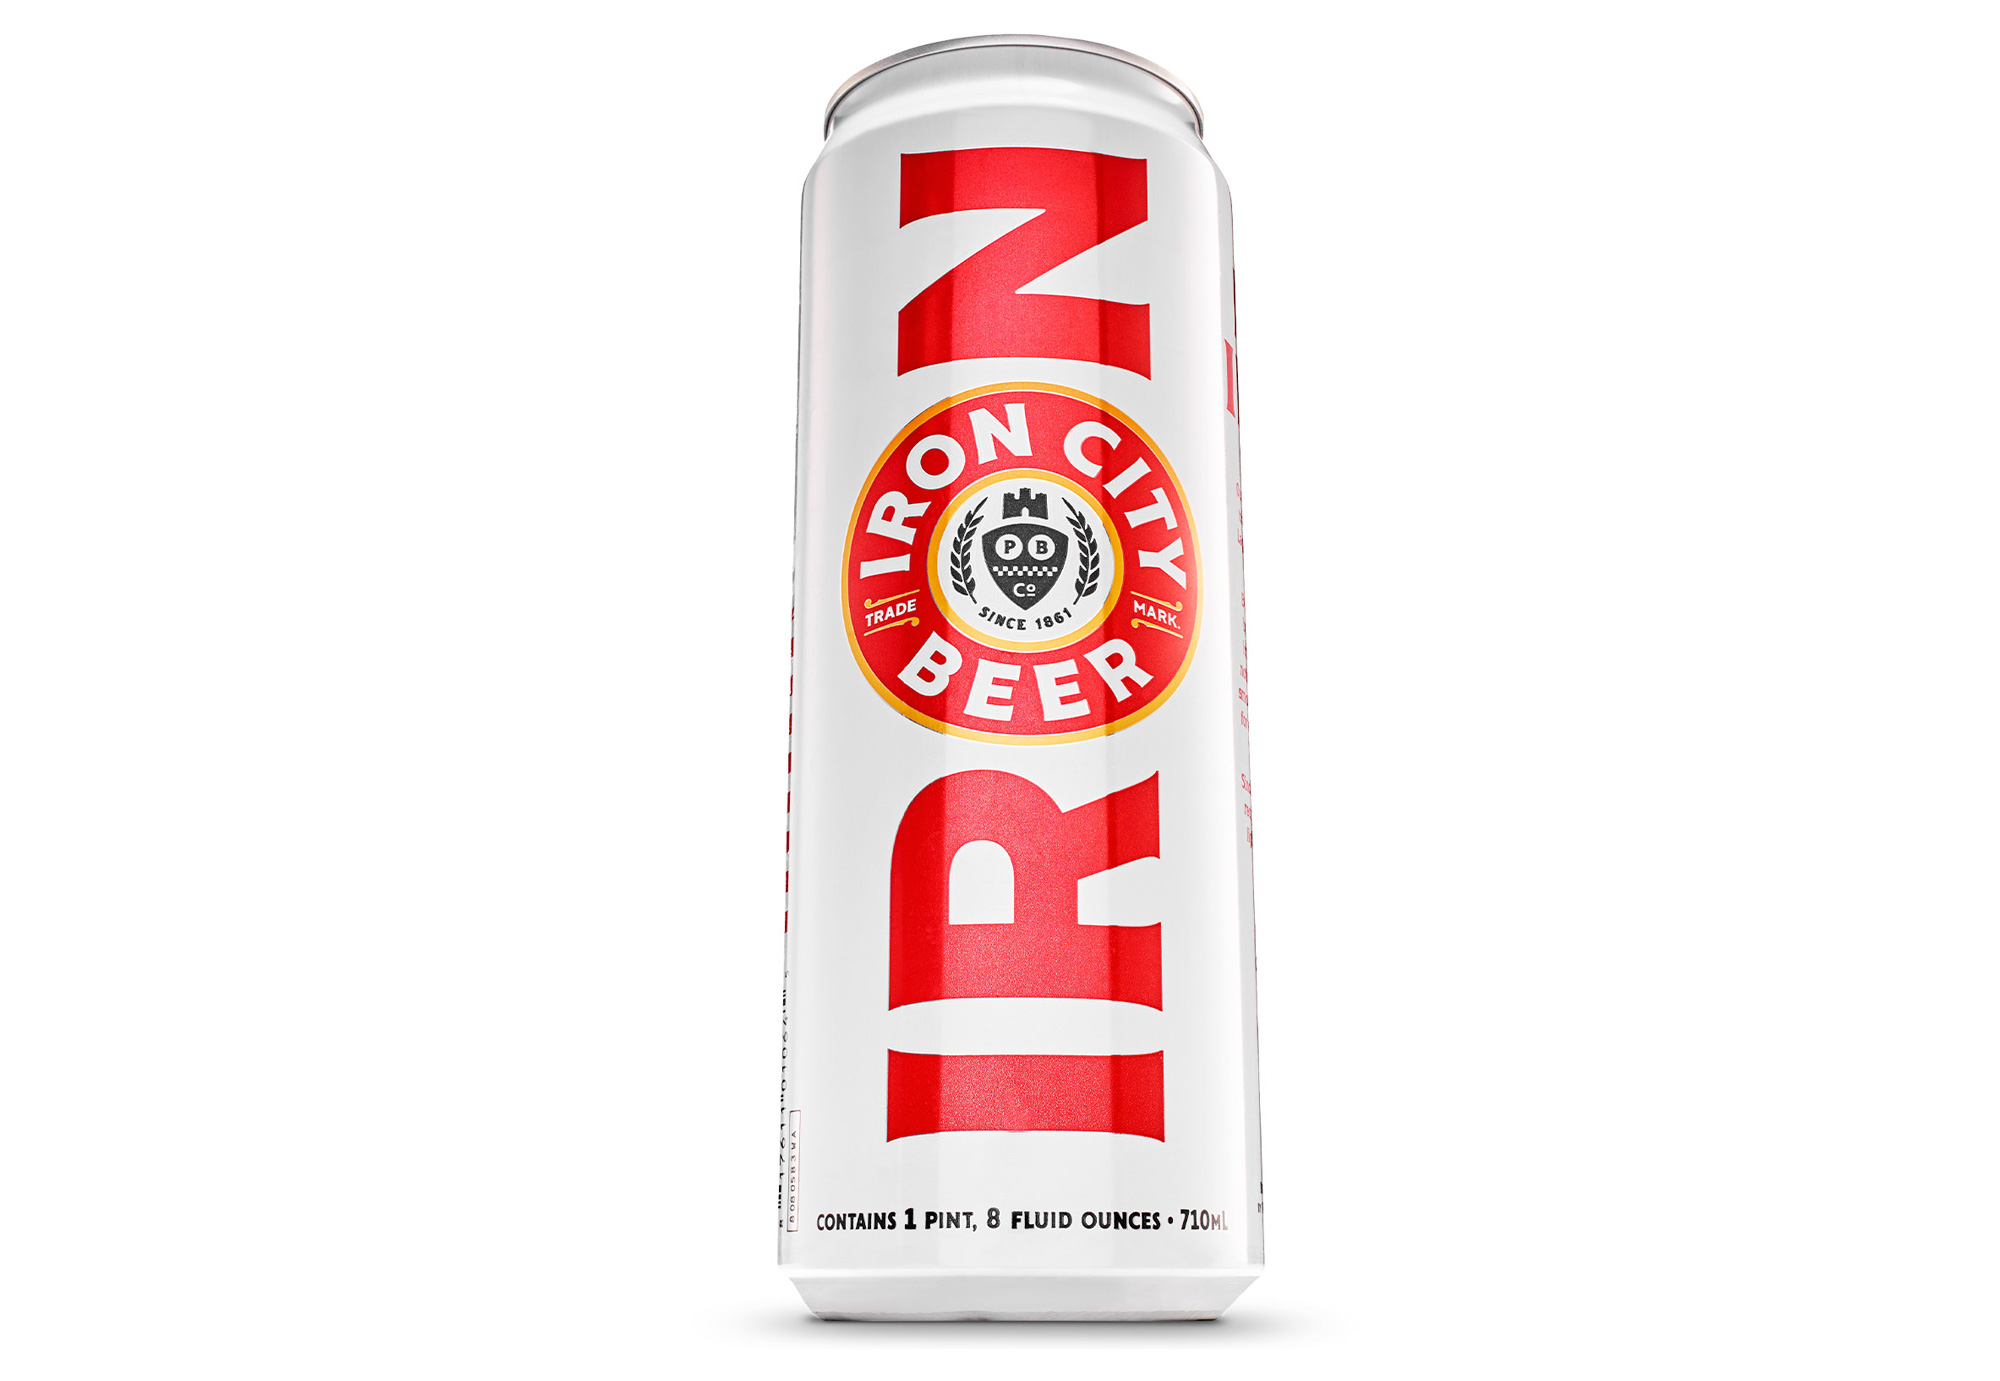 New Logo, Advertising, and Packaging for Iron City Beer by Top Hat